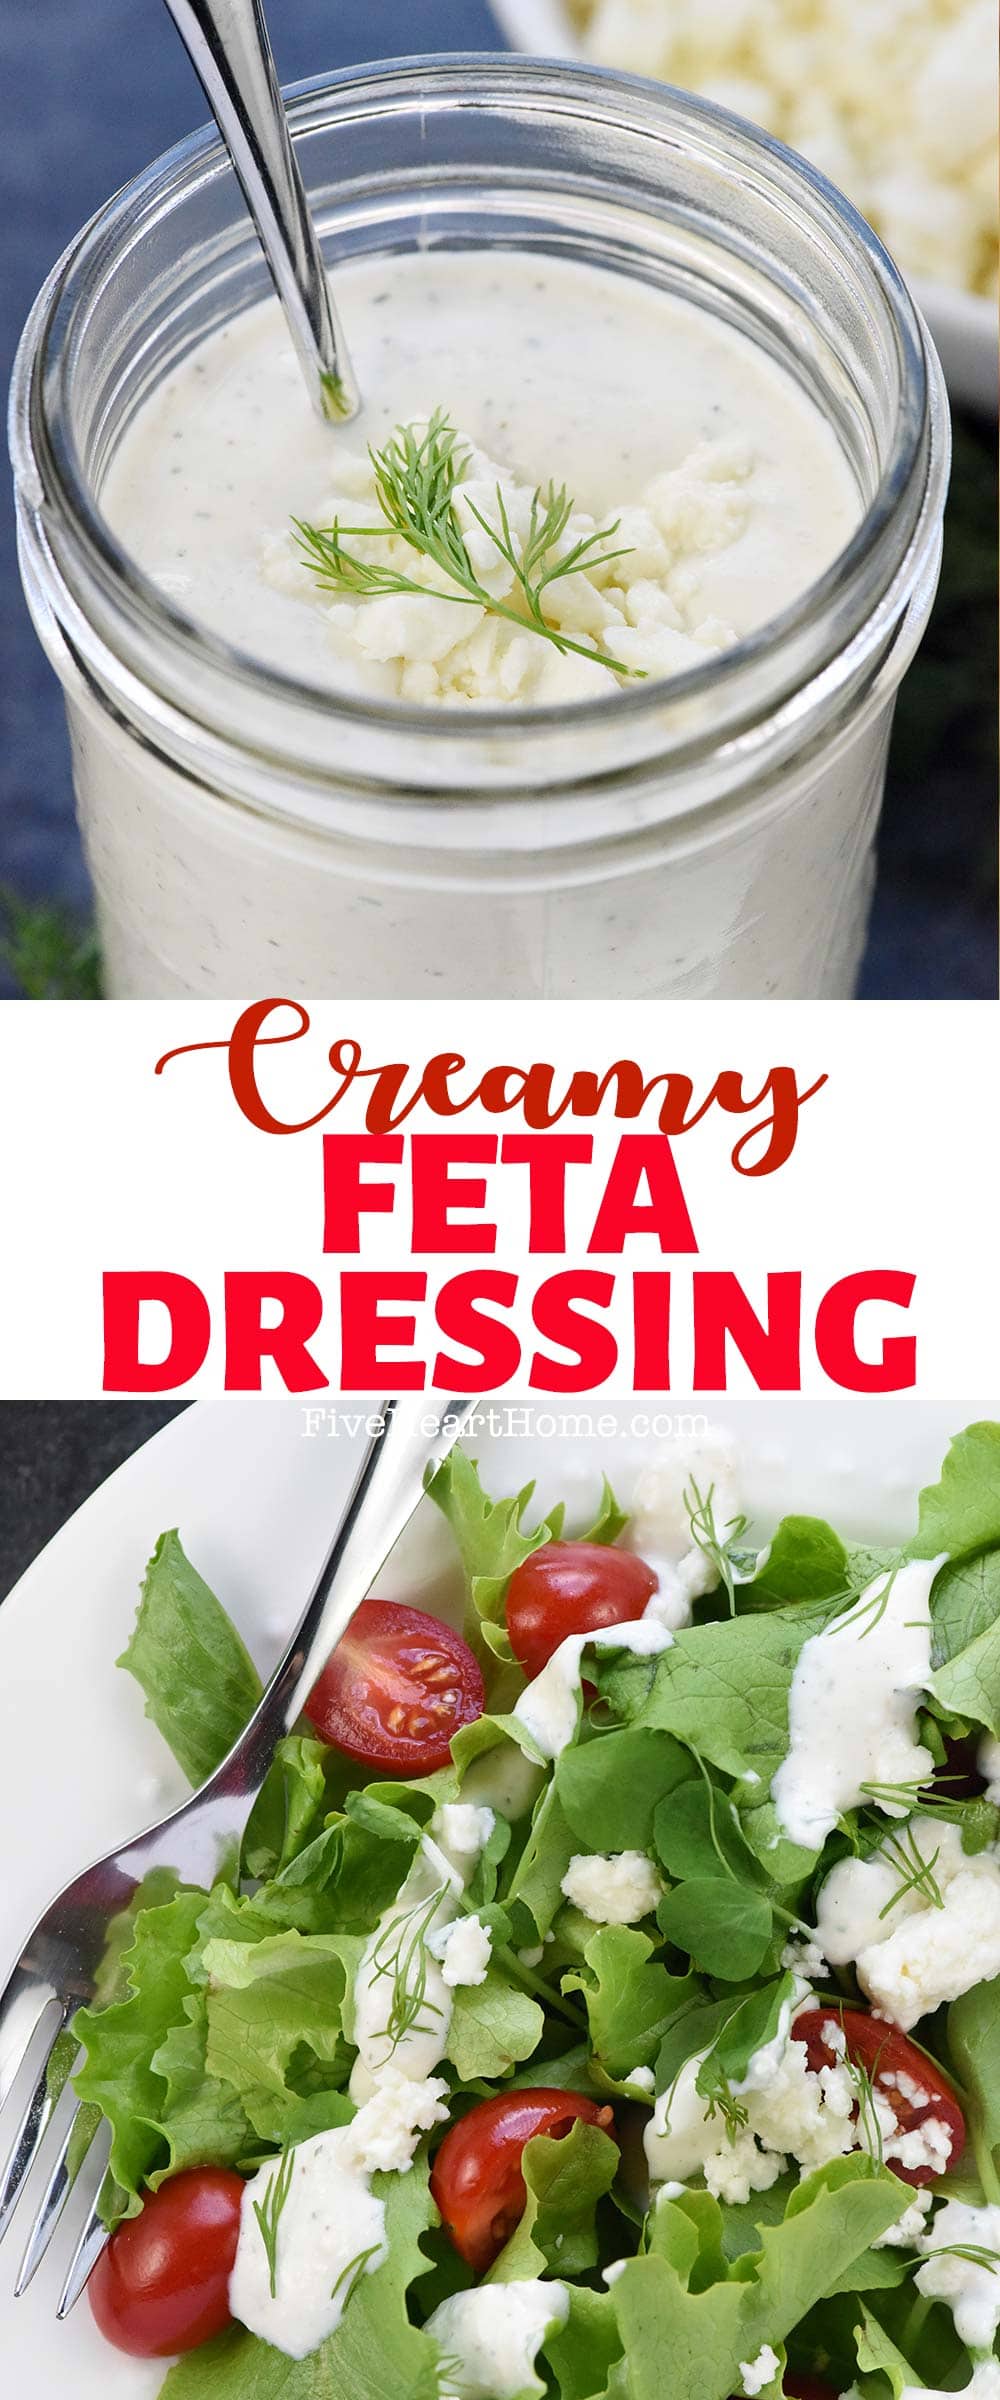 Feta Dressing is creamy, tangy, and silky, featuring Greek yogurt, crumbled feta cheese, and fresh dill for a delicious complement to salads, tomatoes, cucumbers, and more! | FiveHeartHome.com via @fivehearthome